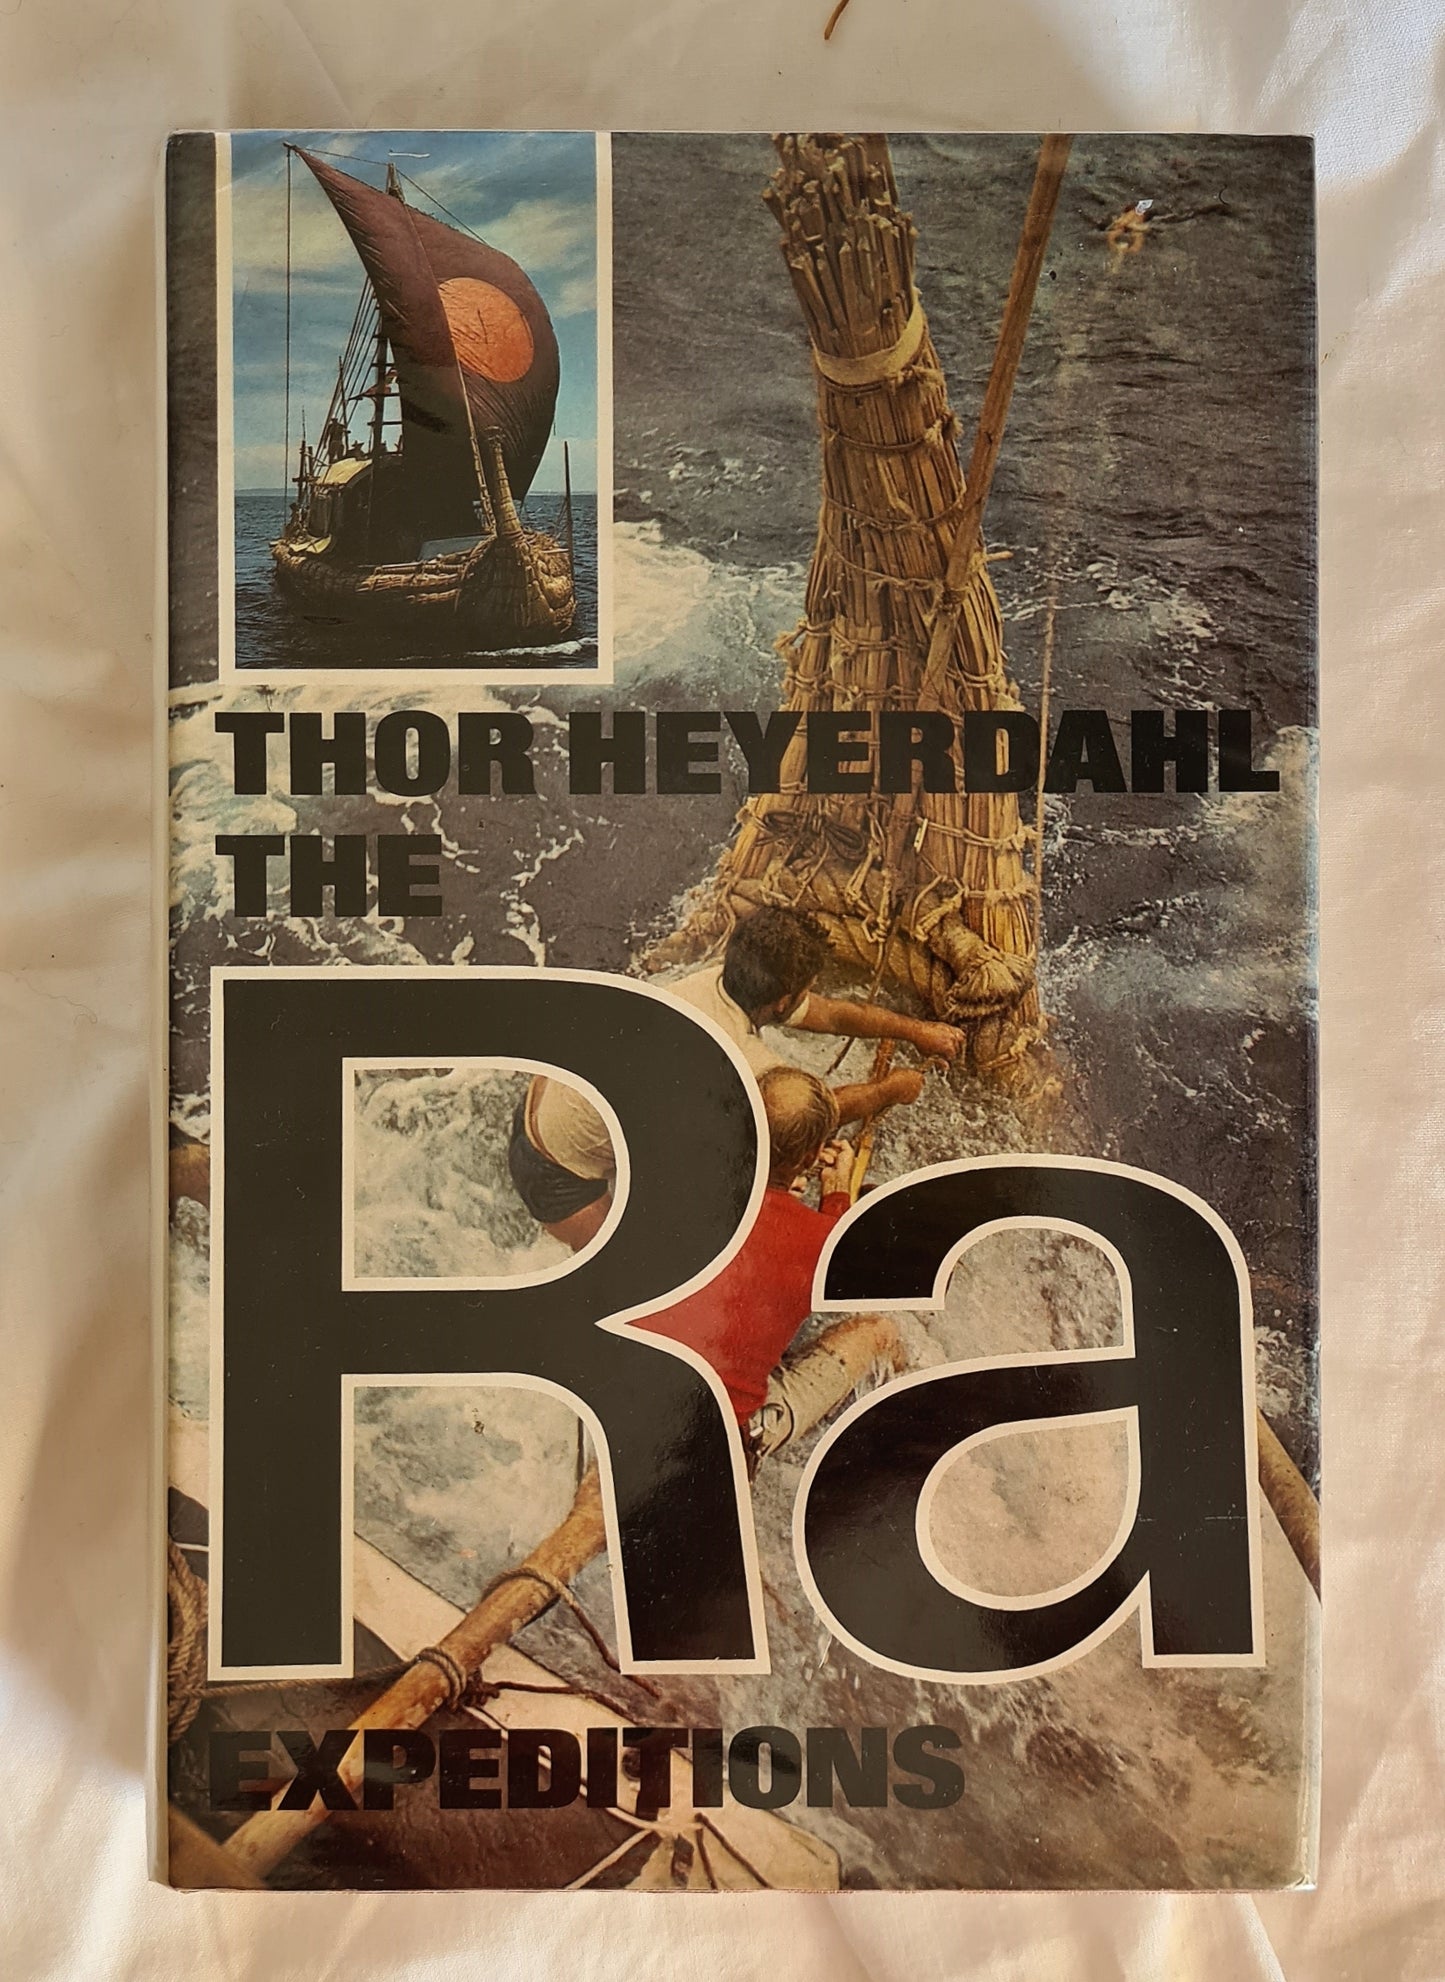 The RA Expeditions  by Thor Heyerdahl  Translated by Patricia Crampton